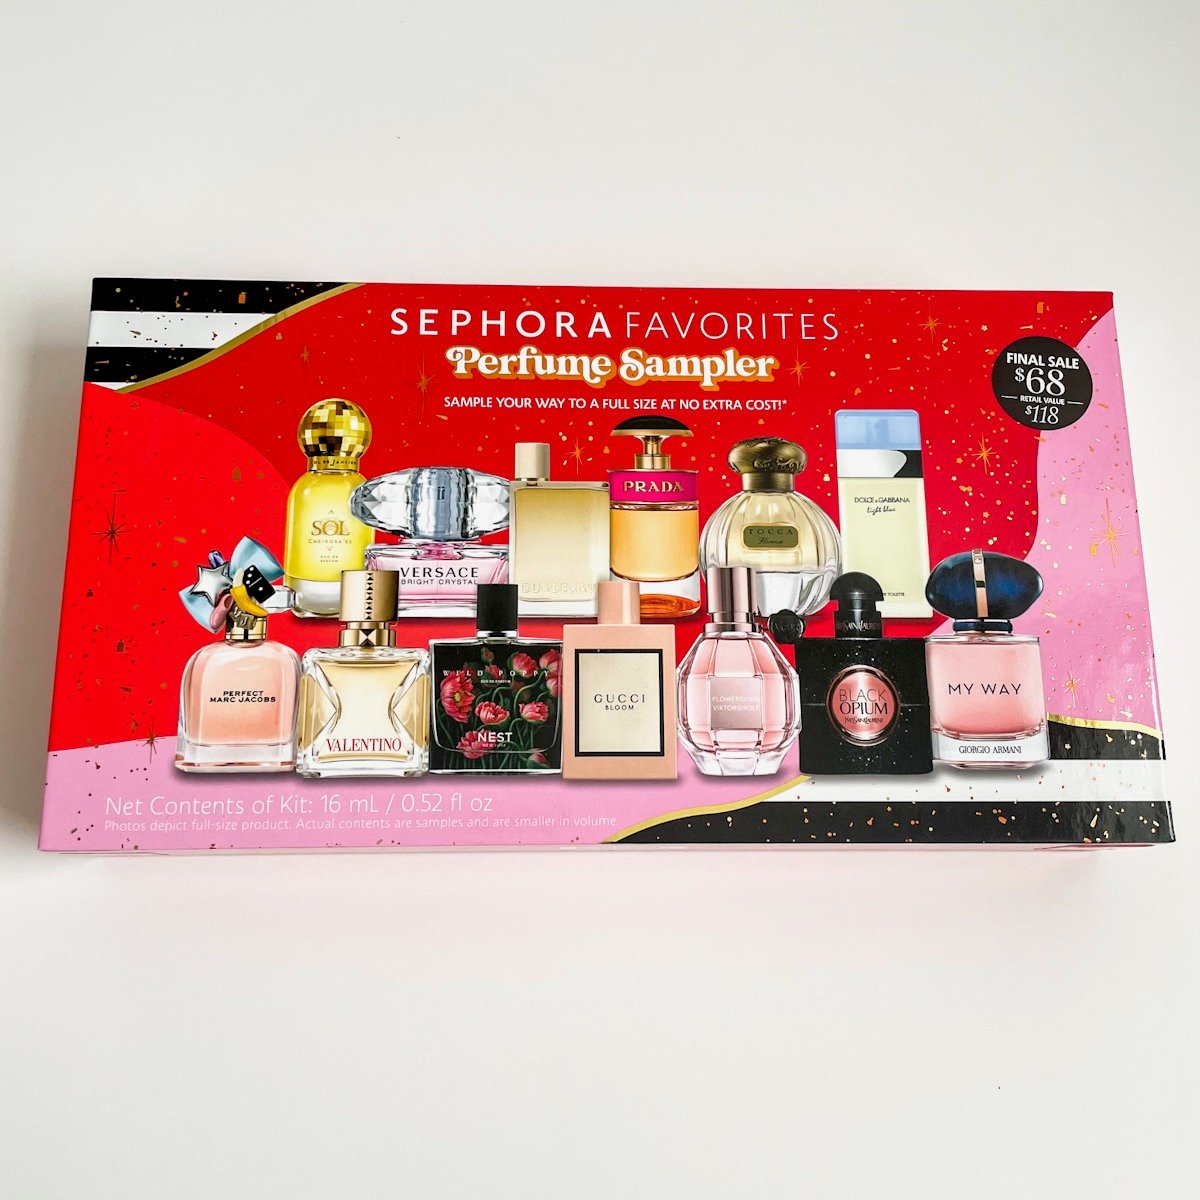 red and pink box with pictures of perfume bottles